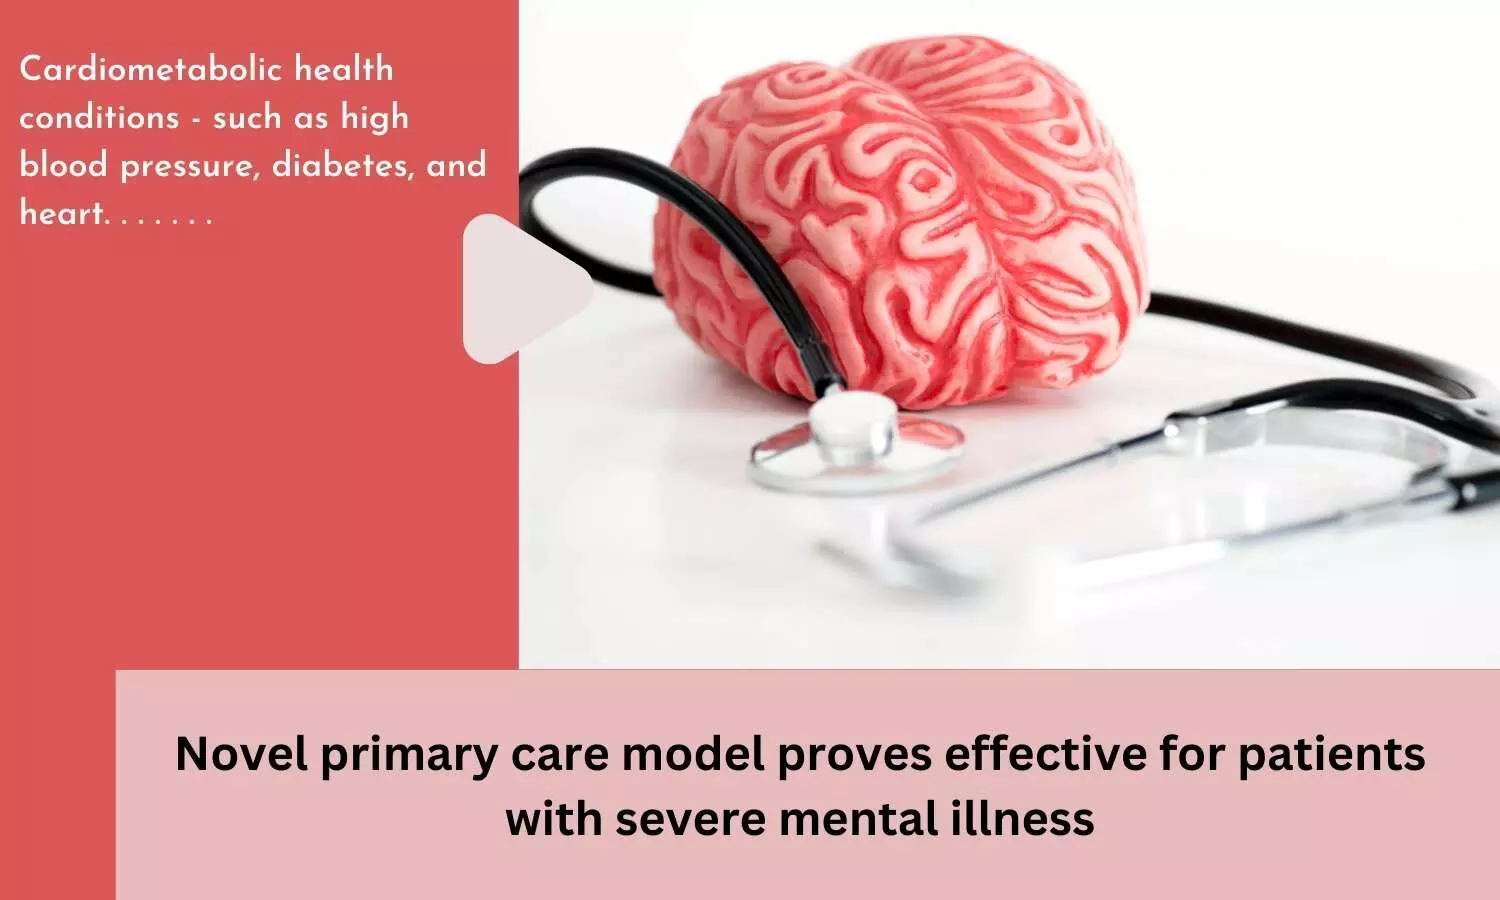 Novel primary care model proves effective for patients with severe mental illness